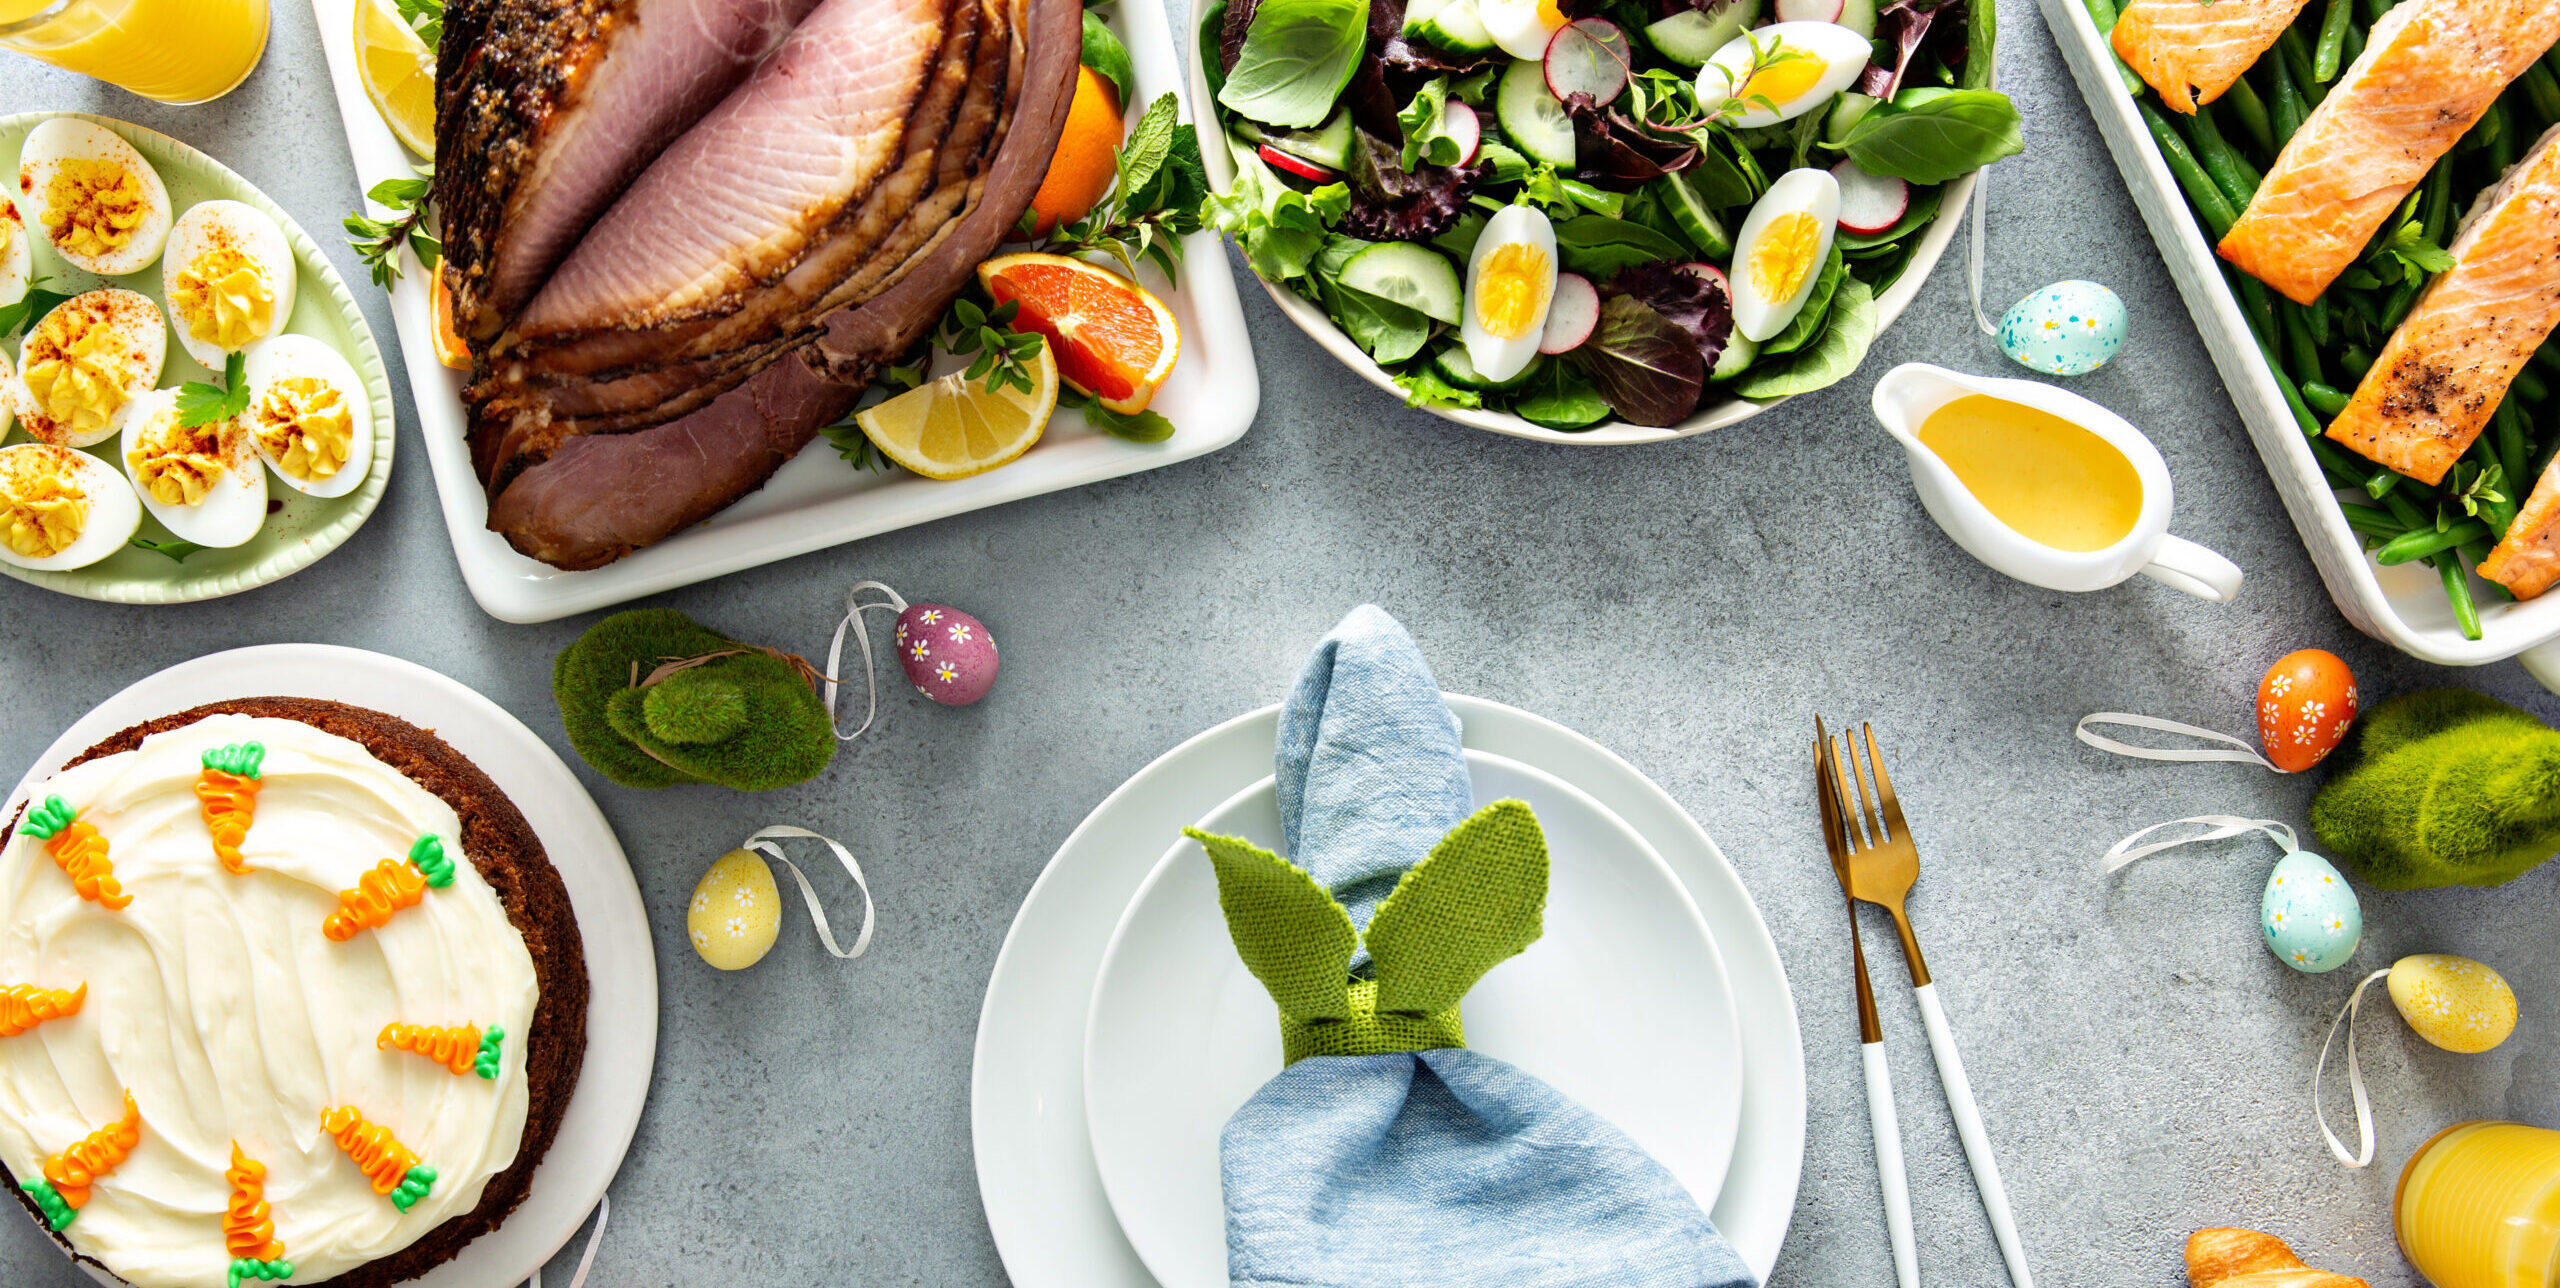 Big traditional Easter brunch with ham, quiche lorraine and carrot cake and place setting